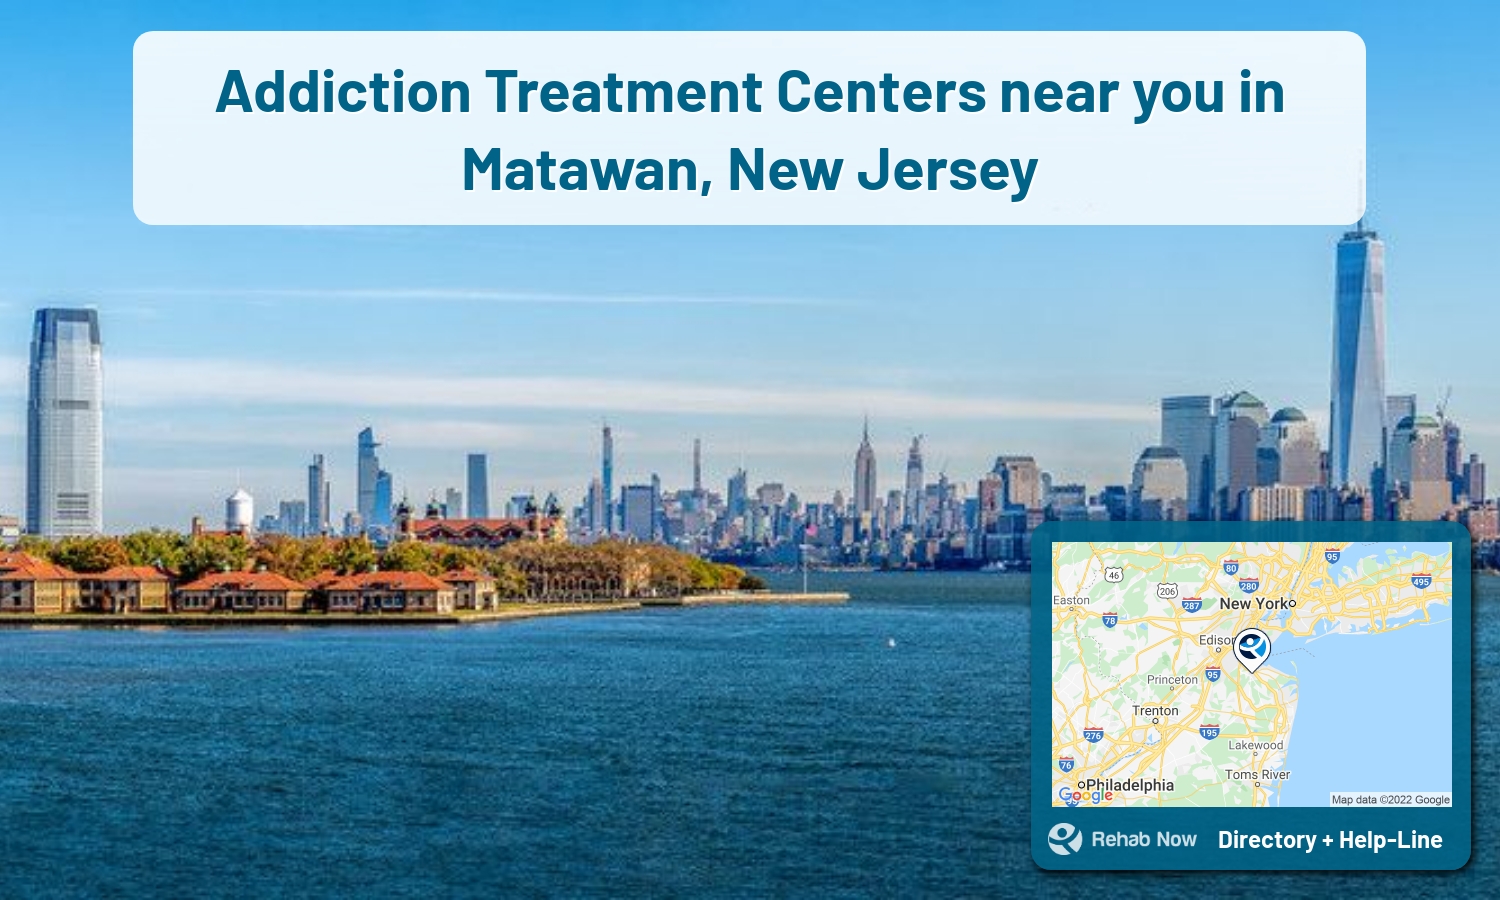 Matawan, NJ Treatment Centers. Find drug rehab in Matawan, New Jersey, or detox and treatment programs. Get the right help now!